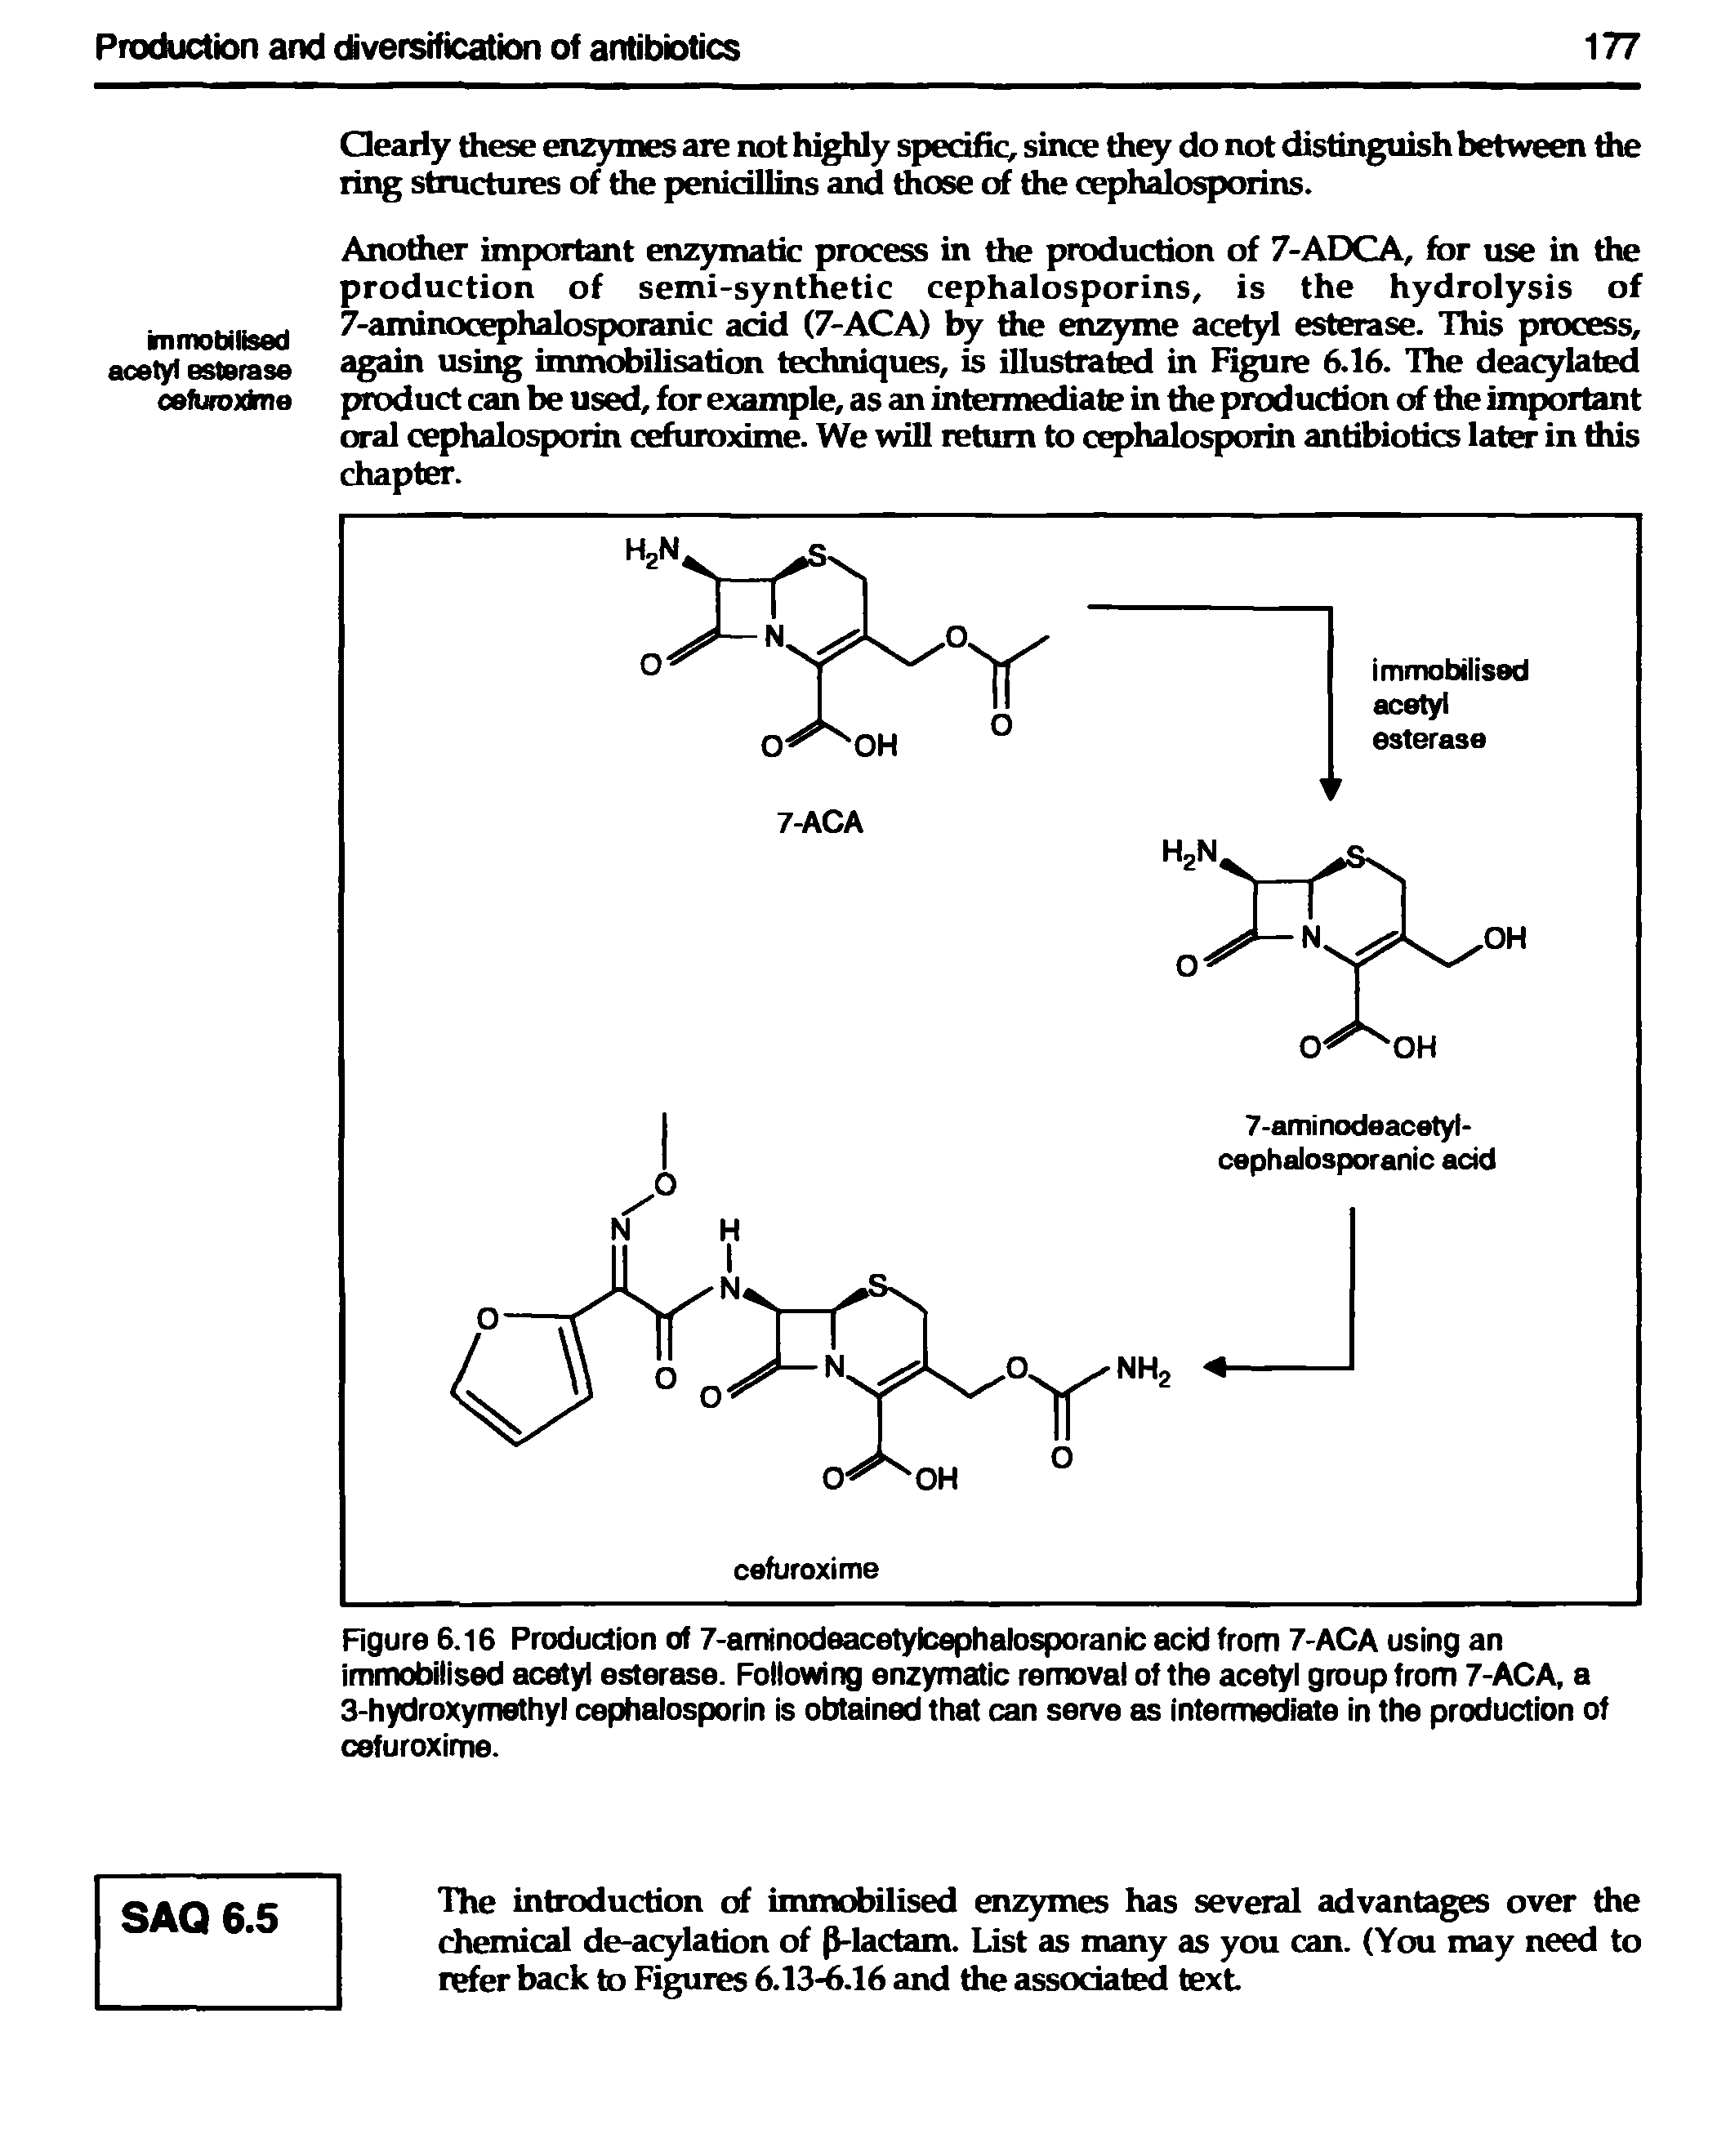 Figure 6.16 Production of 7-aminodeacetyicephalosporanic acid from 7-ACA using an immobilised acetyl esterase. Following enzymatic removal of the acetyl group from 7-ACA, a 3-hydroxymethyl cephalosporin is obtained that can serve as intermediate in the production of cefuroxime.